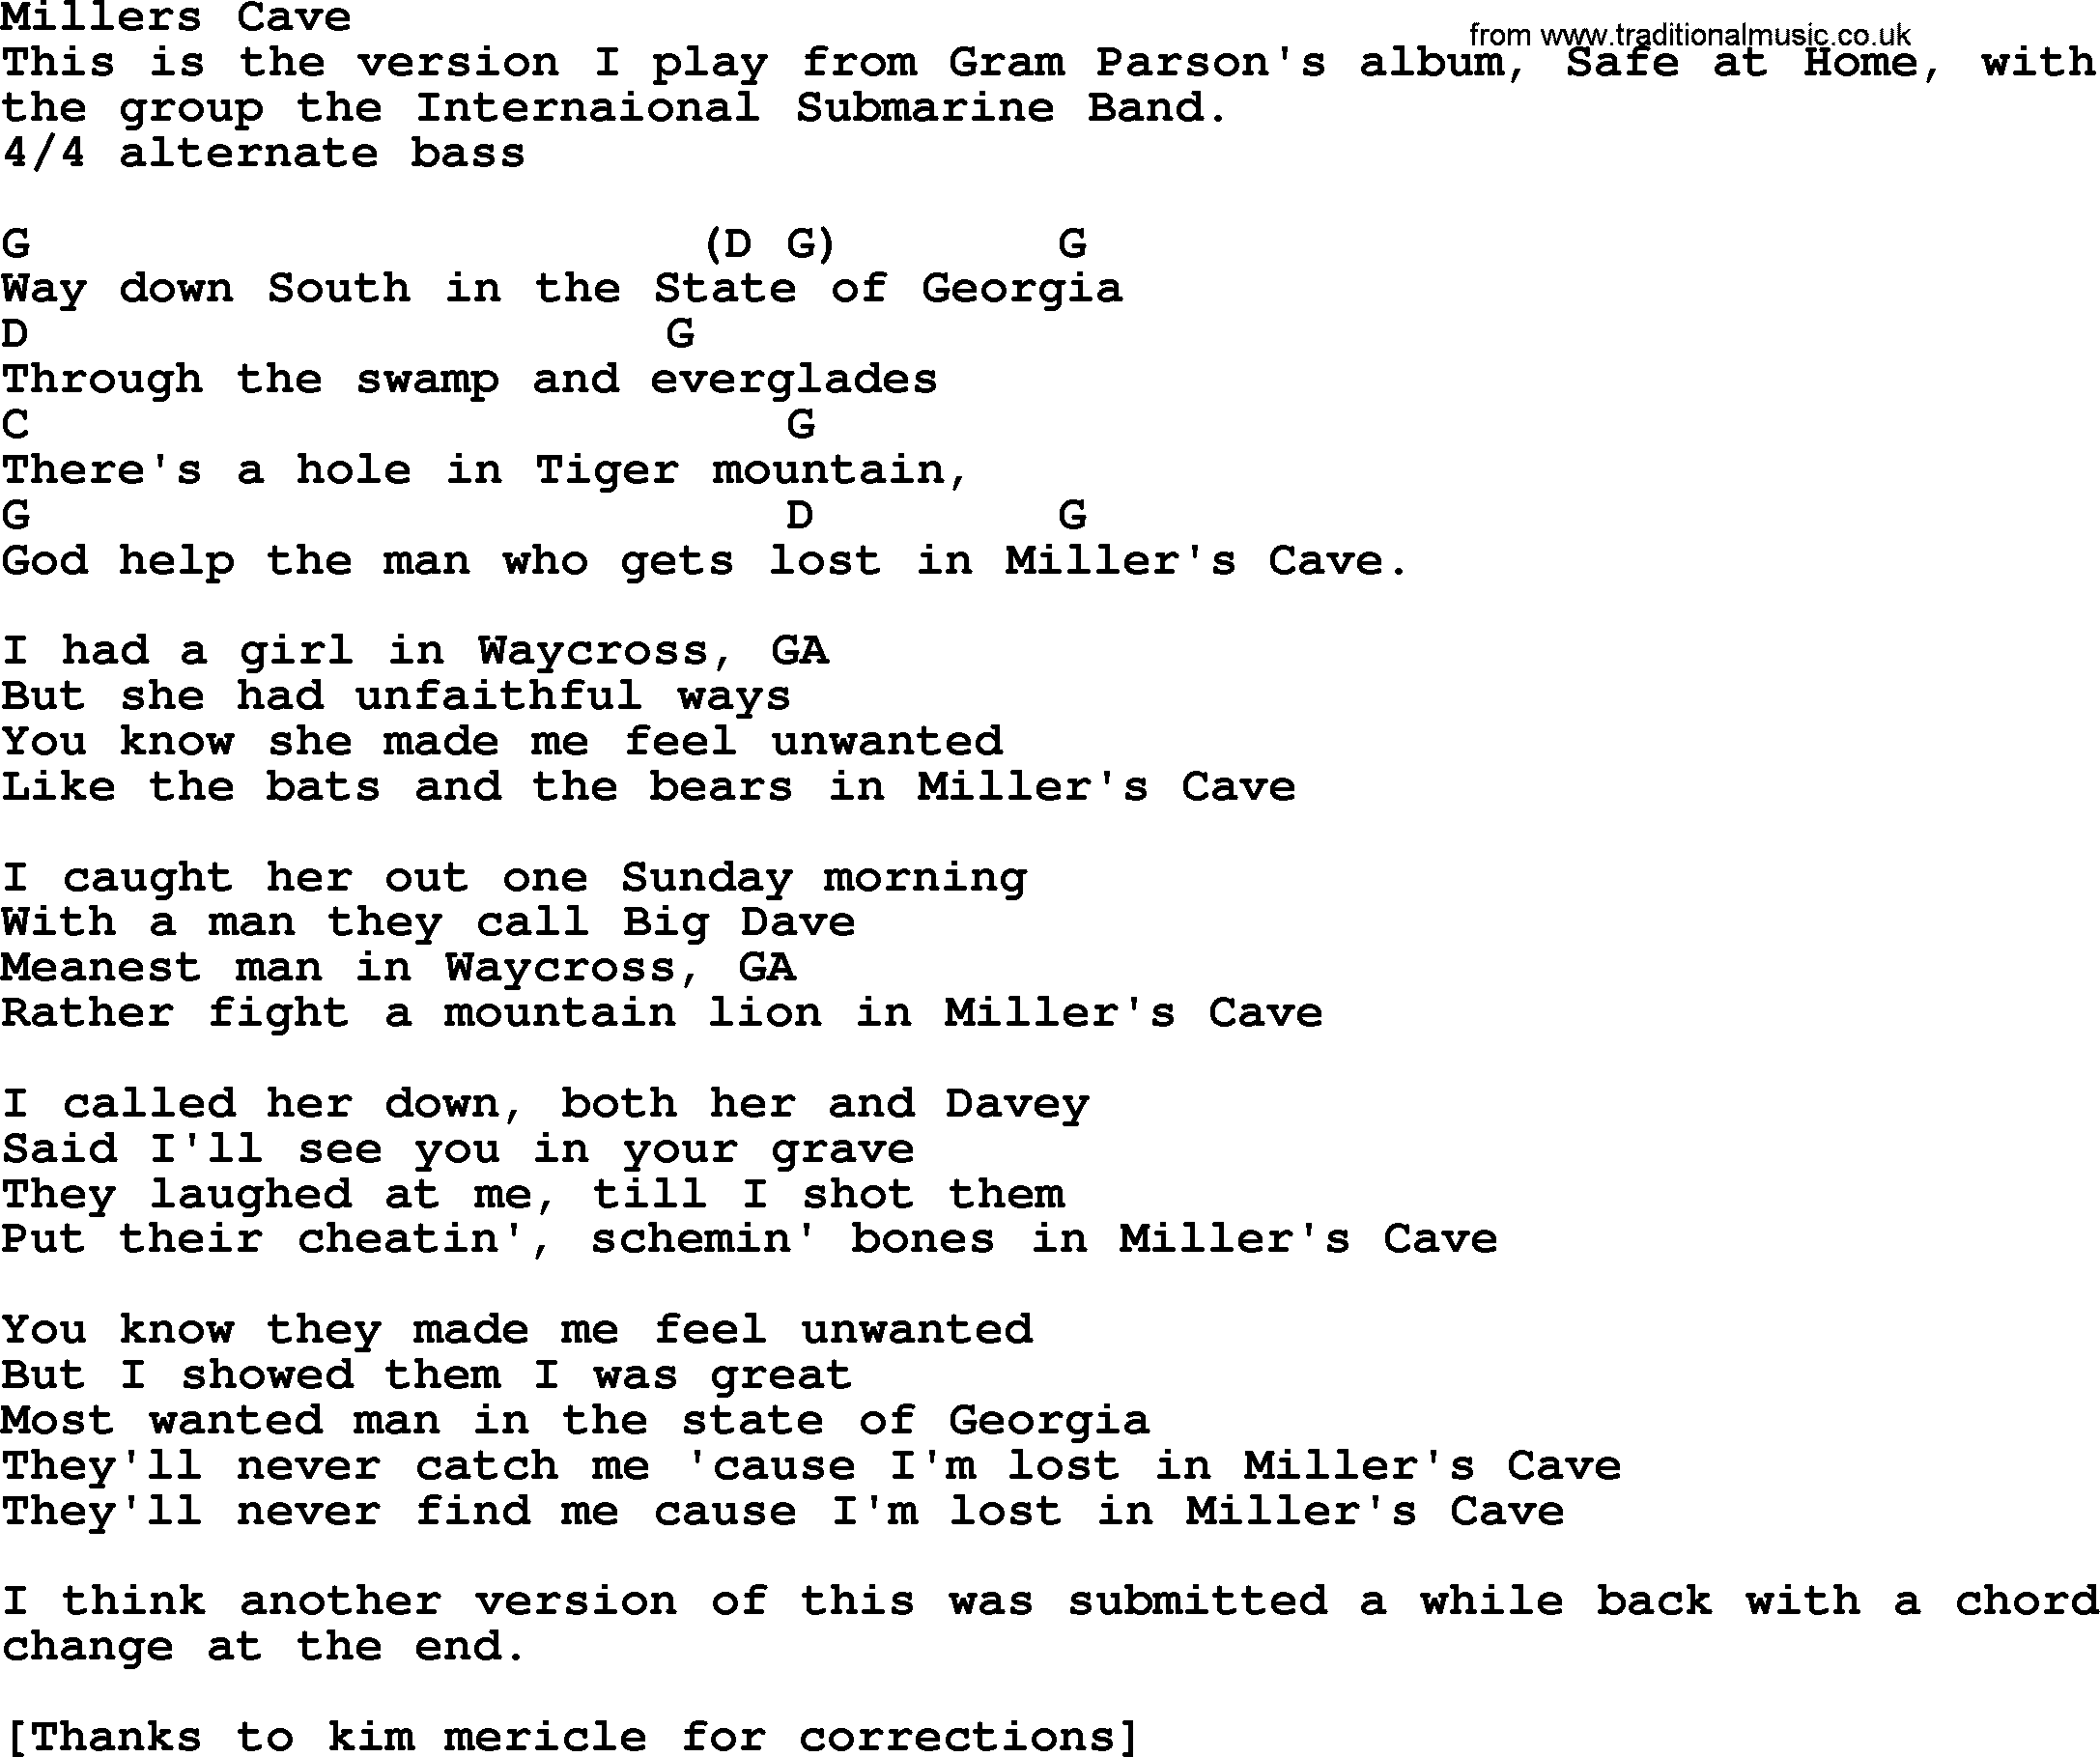 Bluegrass song: Millers Cave, lyrics and chords